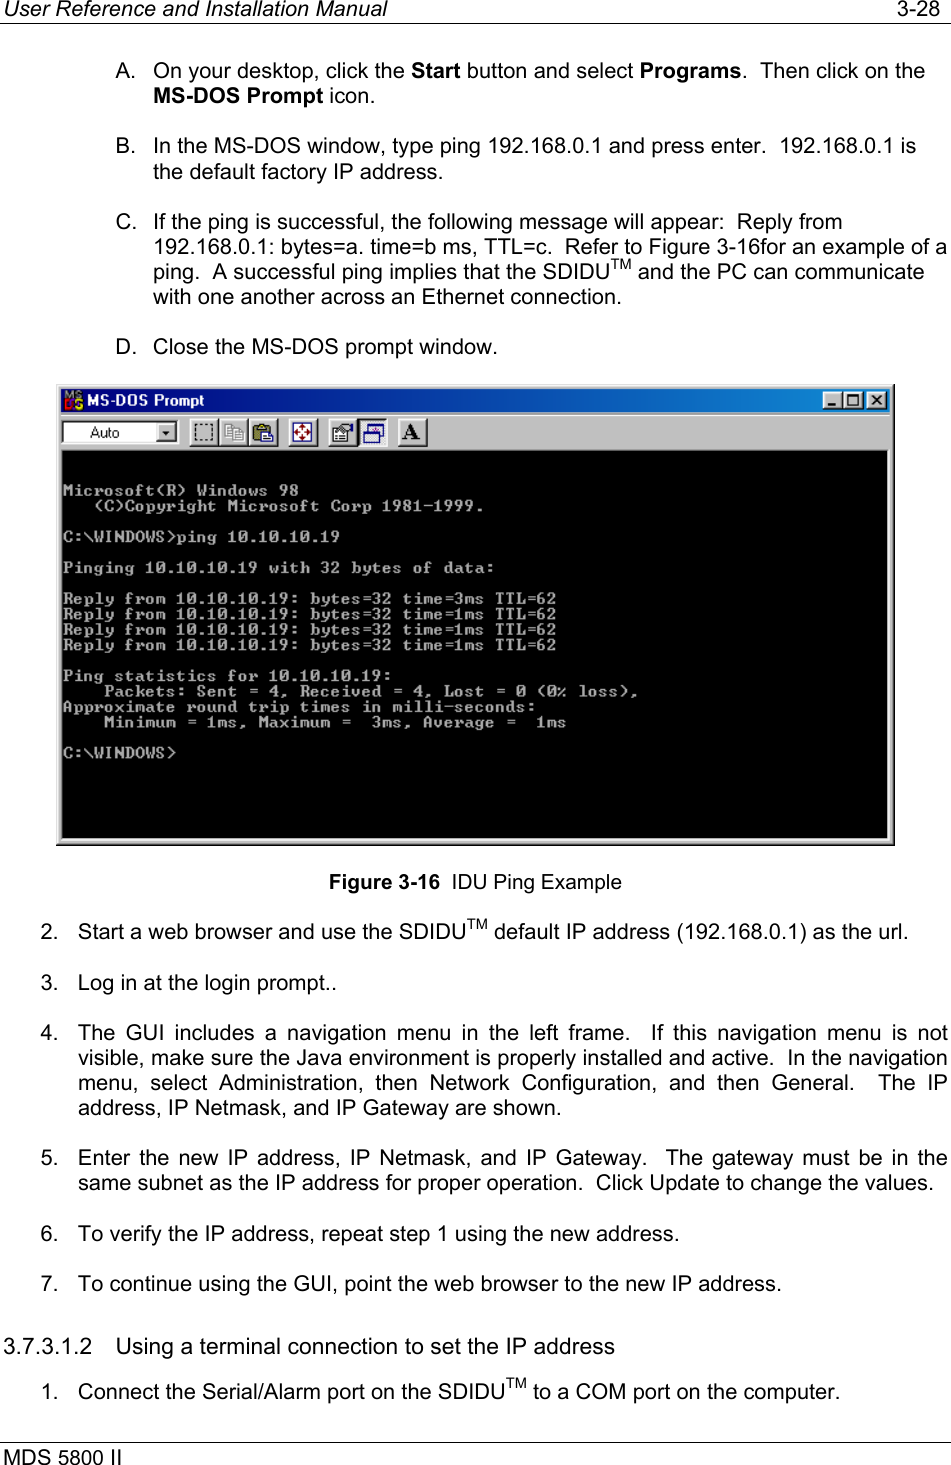 User Reference and Installation Manual   3-28 MDS 5800 II      A.  On your desktop, click the Start button and select Programs.  Then click on the MS-DOS Prompt icon. B.  In the MS-DOS window, type ping 192.168.0.1 and press enter.  192.168.0.1 is the default factory IP address. C.  If the ping is successful, the following message will appear:  Reply from 192.168.0.1: bytes=a. time=b ms, TTL=c.  Refer to Figure 3-16for an example of a ping.  A successful ping implies that the SDIDUTM and the PC can communicate with one another across an Ethernet connection. D.  Close the MS-DOS prompt window.  Figure 3-16  IDU Ping Example 2.  Start a web browser and use the SDIDUTM default IP address (192.168.0.1) as the url. 3.  Log in at the login prompt.. 4.  The GUI includes a navigation menu in the left frame.  If this navigation menu is not visible, make sure the Java environment is properly installed and active.  In the navigation menu, select Administration, then Network Configuration, and then General.  The IP address, IP Netmask, and IP Gateway are shown. 5.  Enter the new IP address, IP Netmask, and IP Gateway.  The gateway must be in the same subnet as the IP address for proper operation.  Click Update to change the values. 6.  To verify the IP address, repeat step 1 using the new address. 7.  To continue using the GUI, point the web browser to the new IP address. 3.7.3.1.2  Using a terminal connection to set the IP address 1.  Connect the Serial/Alarm port on the SDIDUTM to a COM port on the computer. 